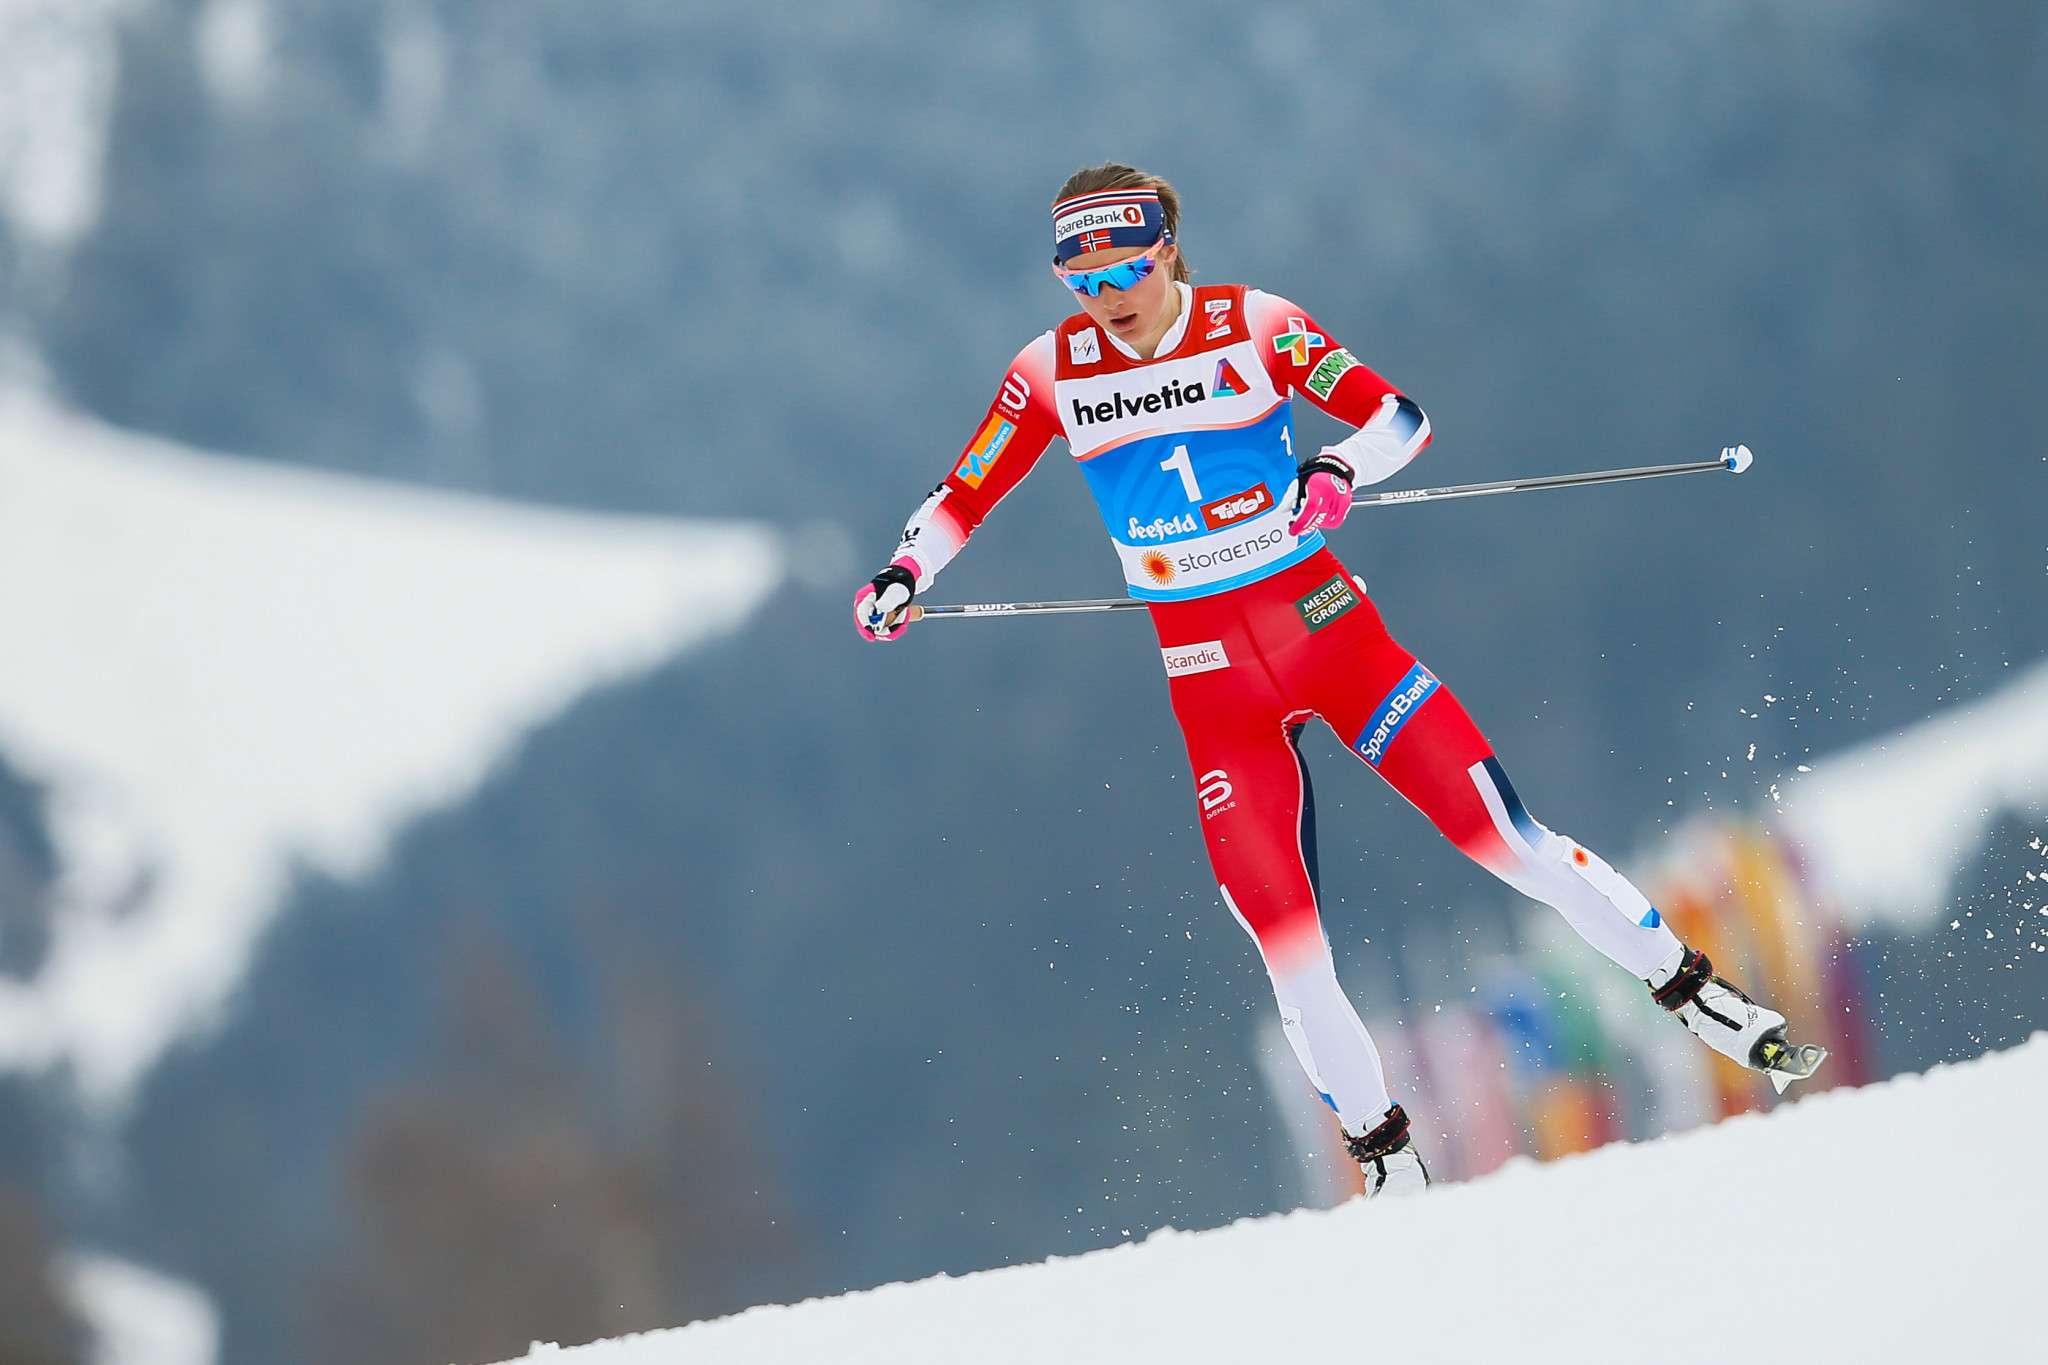 Ingvild Flugstad Østberg could wrap up a double Norwegian victory in the Canadian city ©Getty Images